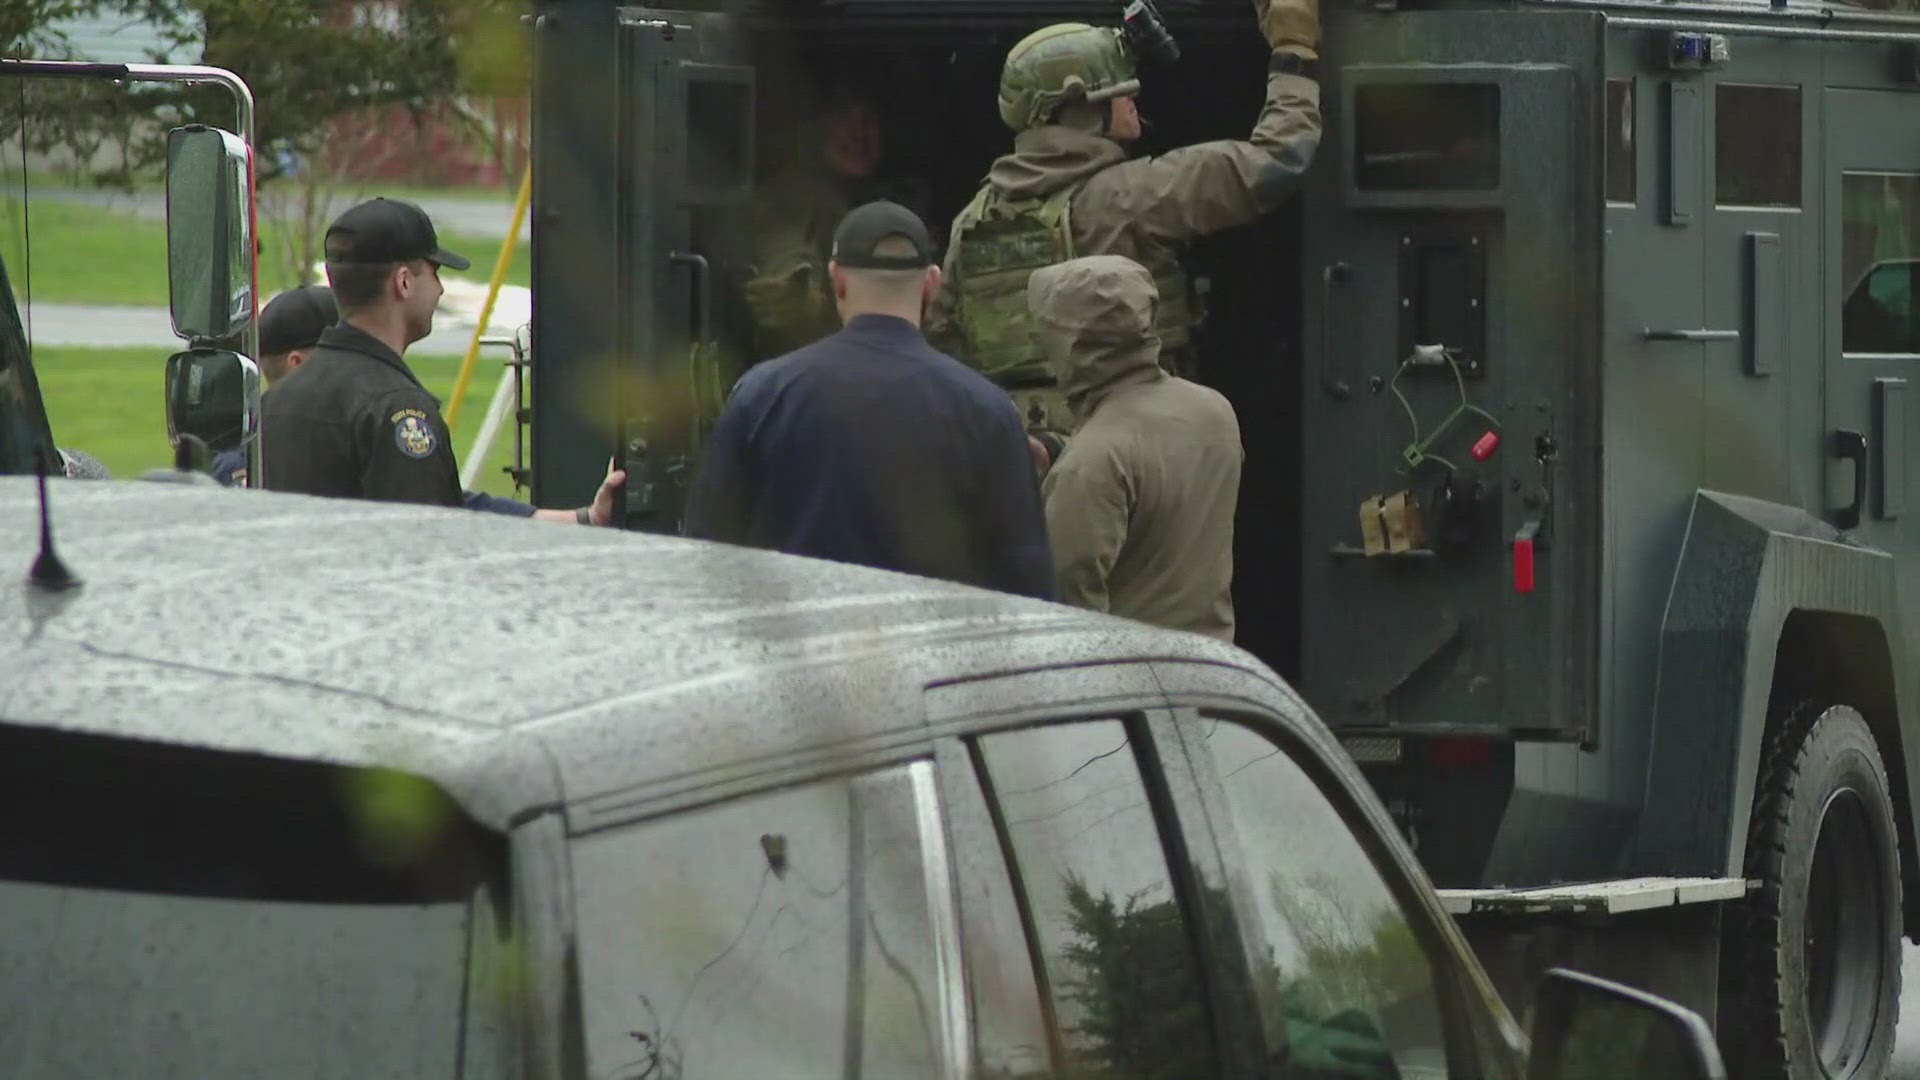 The Maine Department of Public Safety confirmed the Maine State Police Tactical Team was at the scene on Sunset Ridge in Sidney.